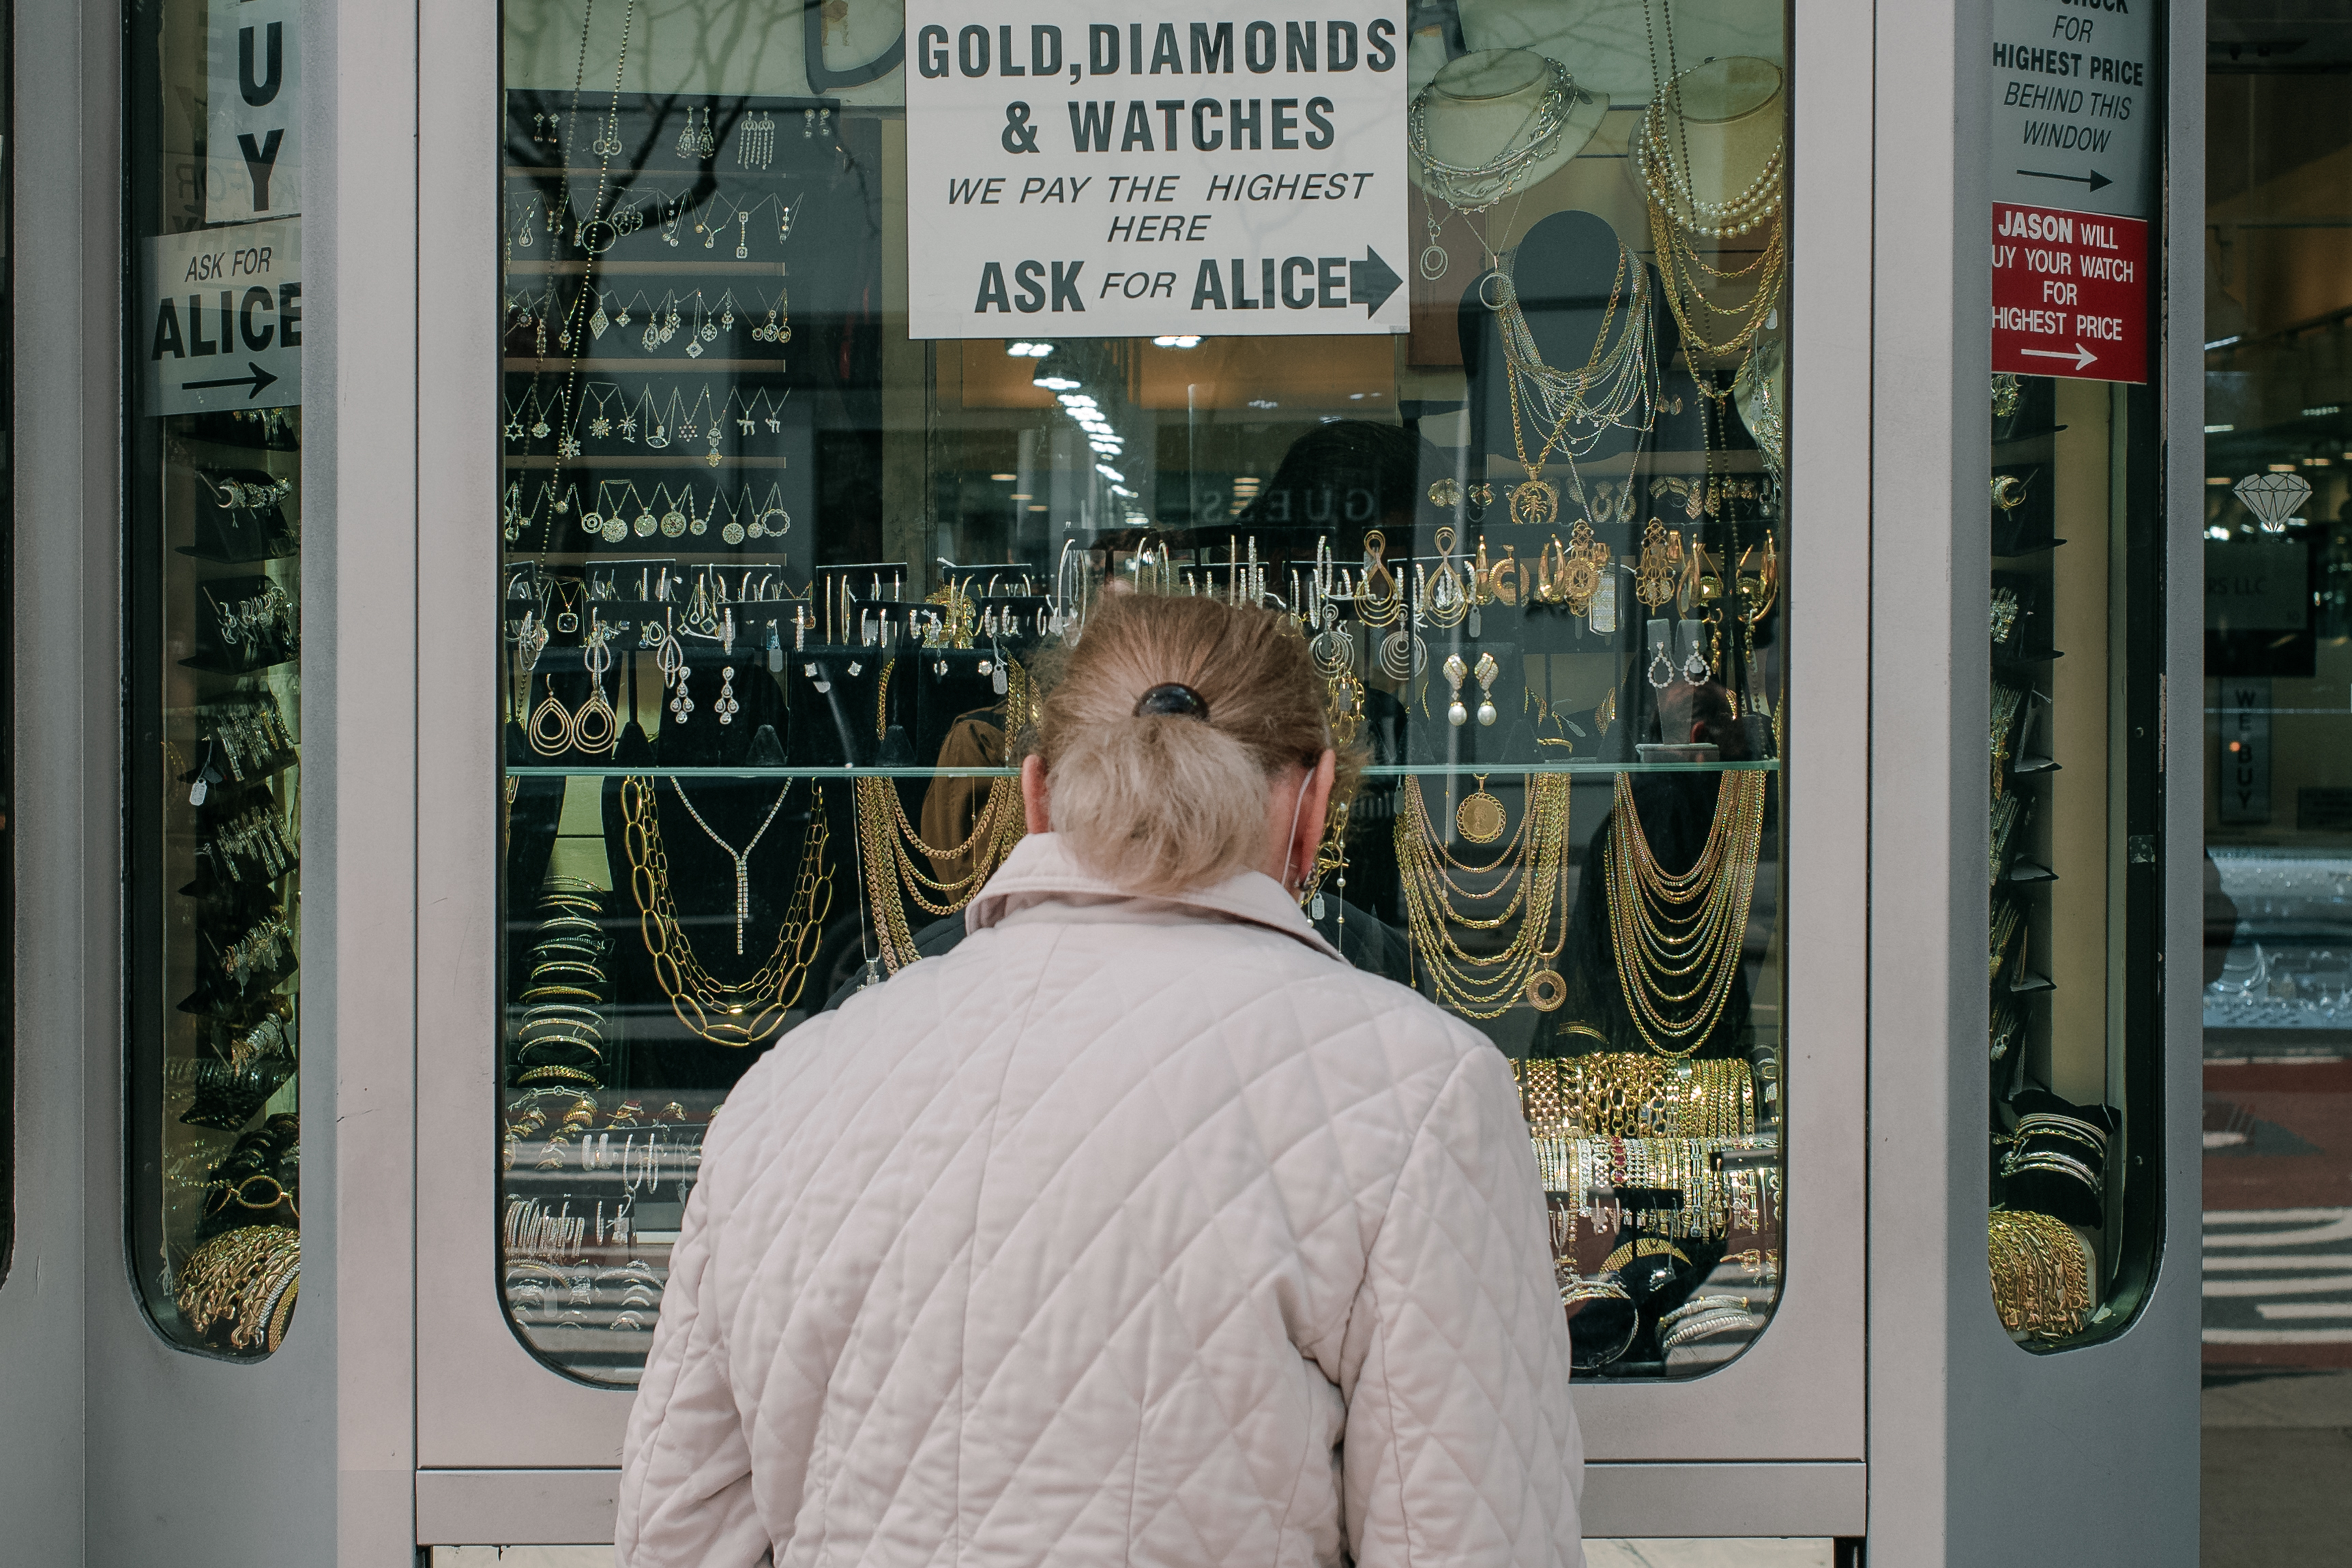 A photo of a woman looking at jewelry in a store window